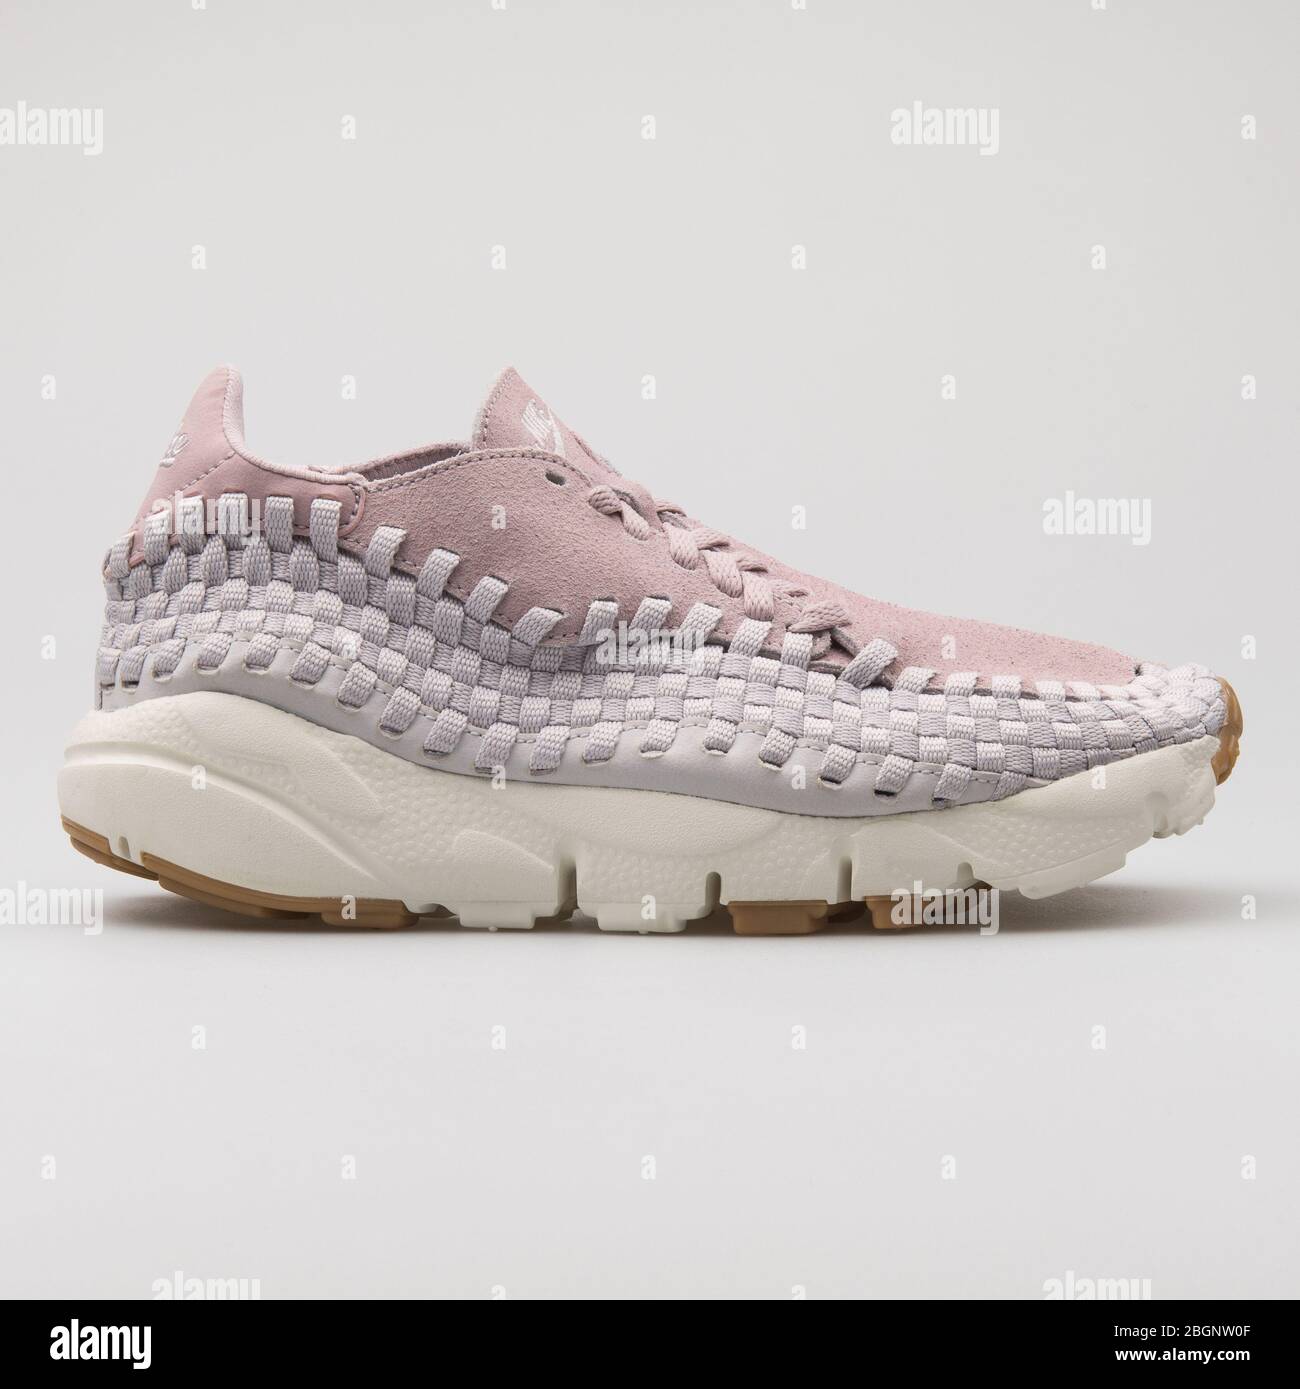 VIENNA, AUSTRIA - AUGUST 29, 2017: Nike Air Footscape Woven Chukka suede  rose sneaker on white background Stock Photo - Alamy